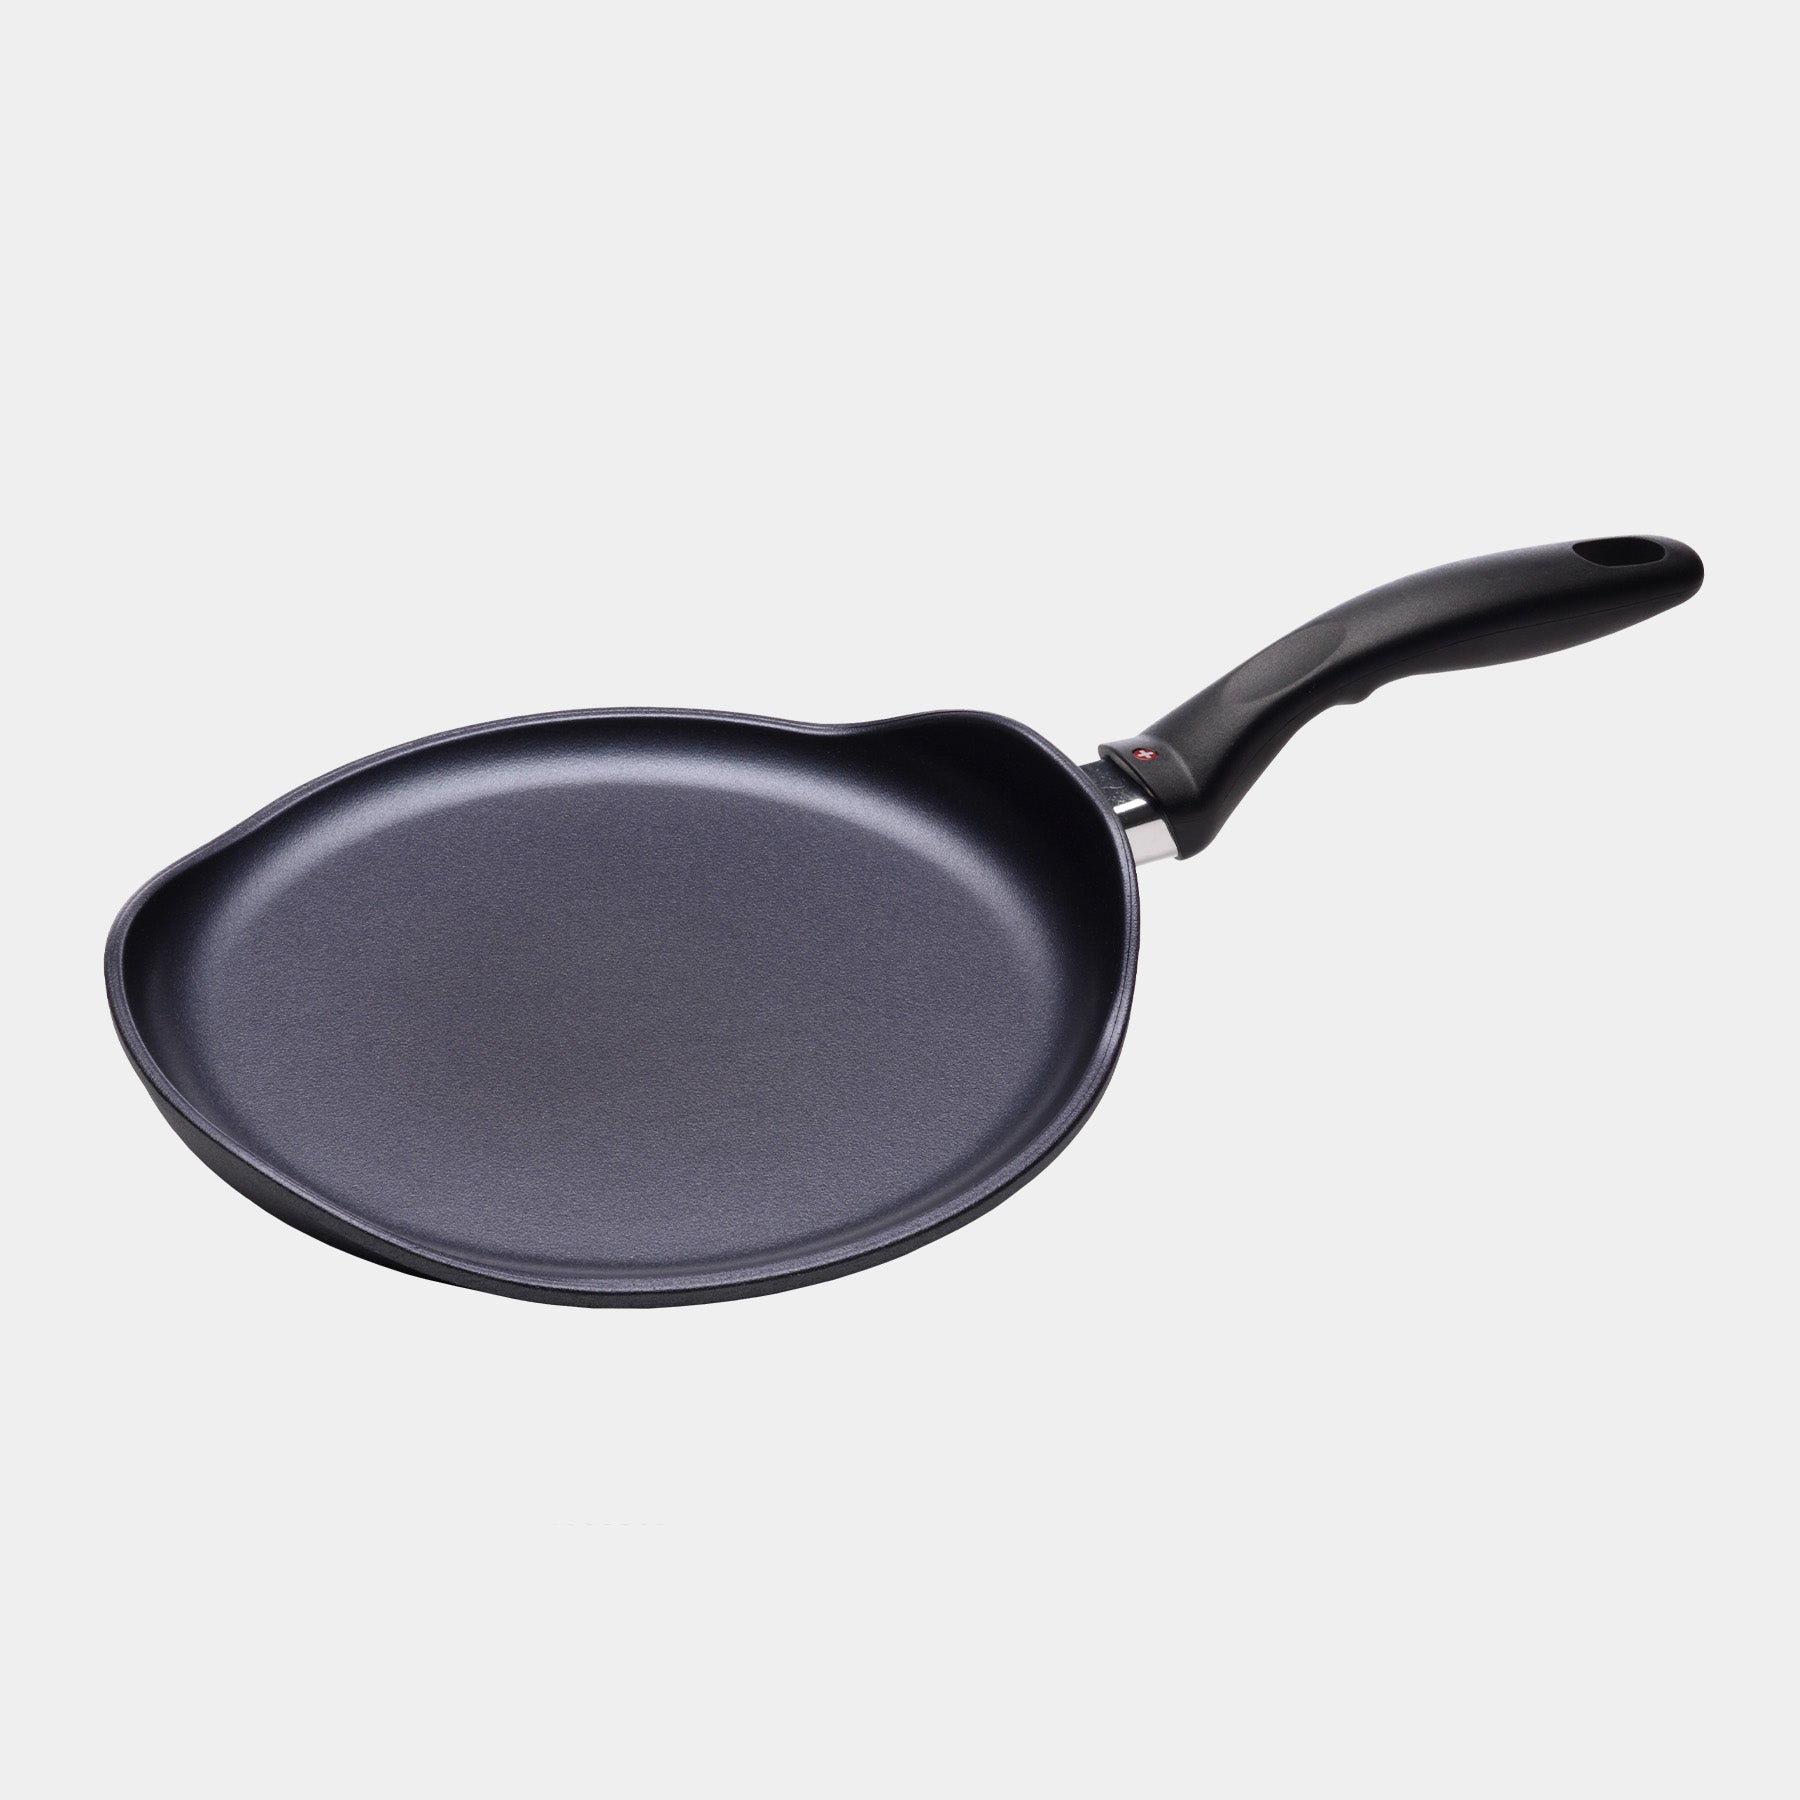 HD Nonstick 10.25" Crepe Pan - Induction